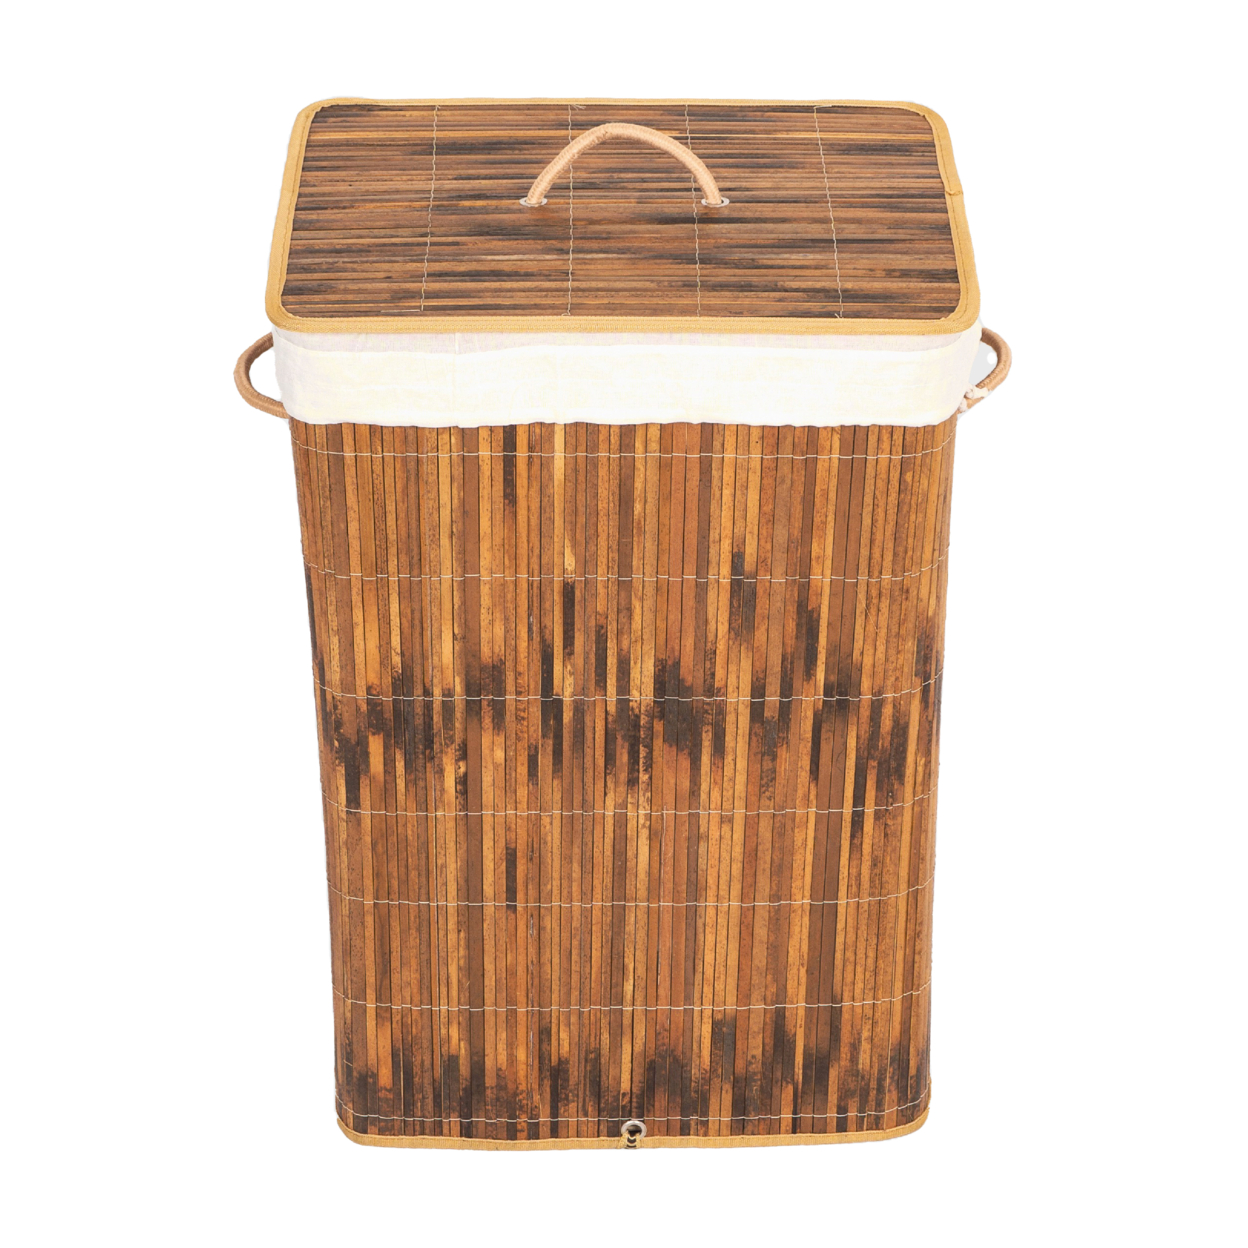 Foldable Laundry Hamper With Lid And Handles For Easy Carrying - Bamboo Round